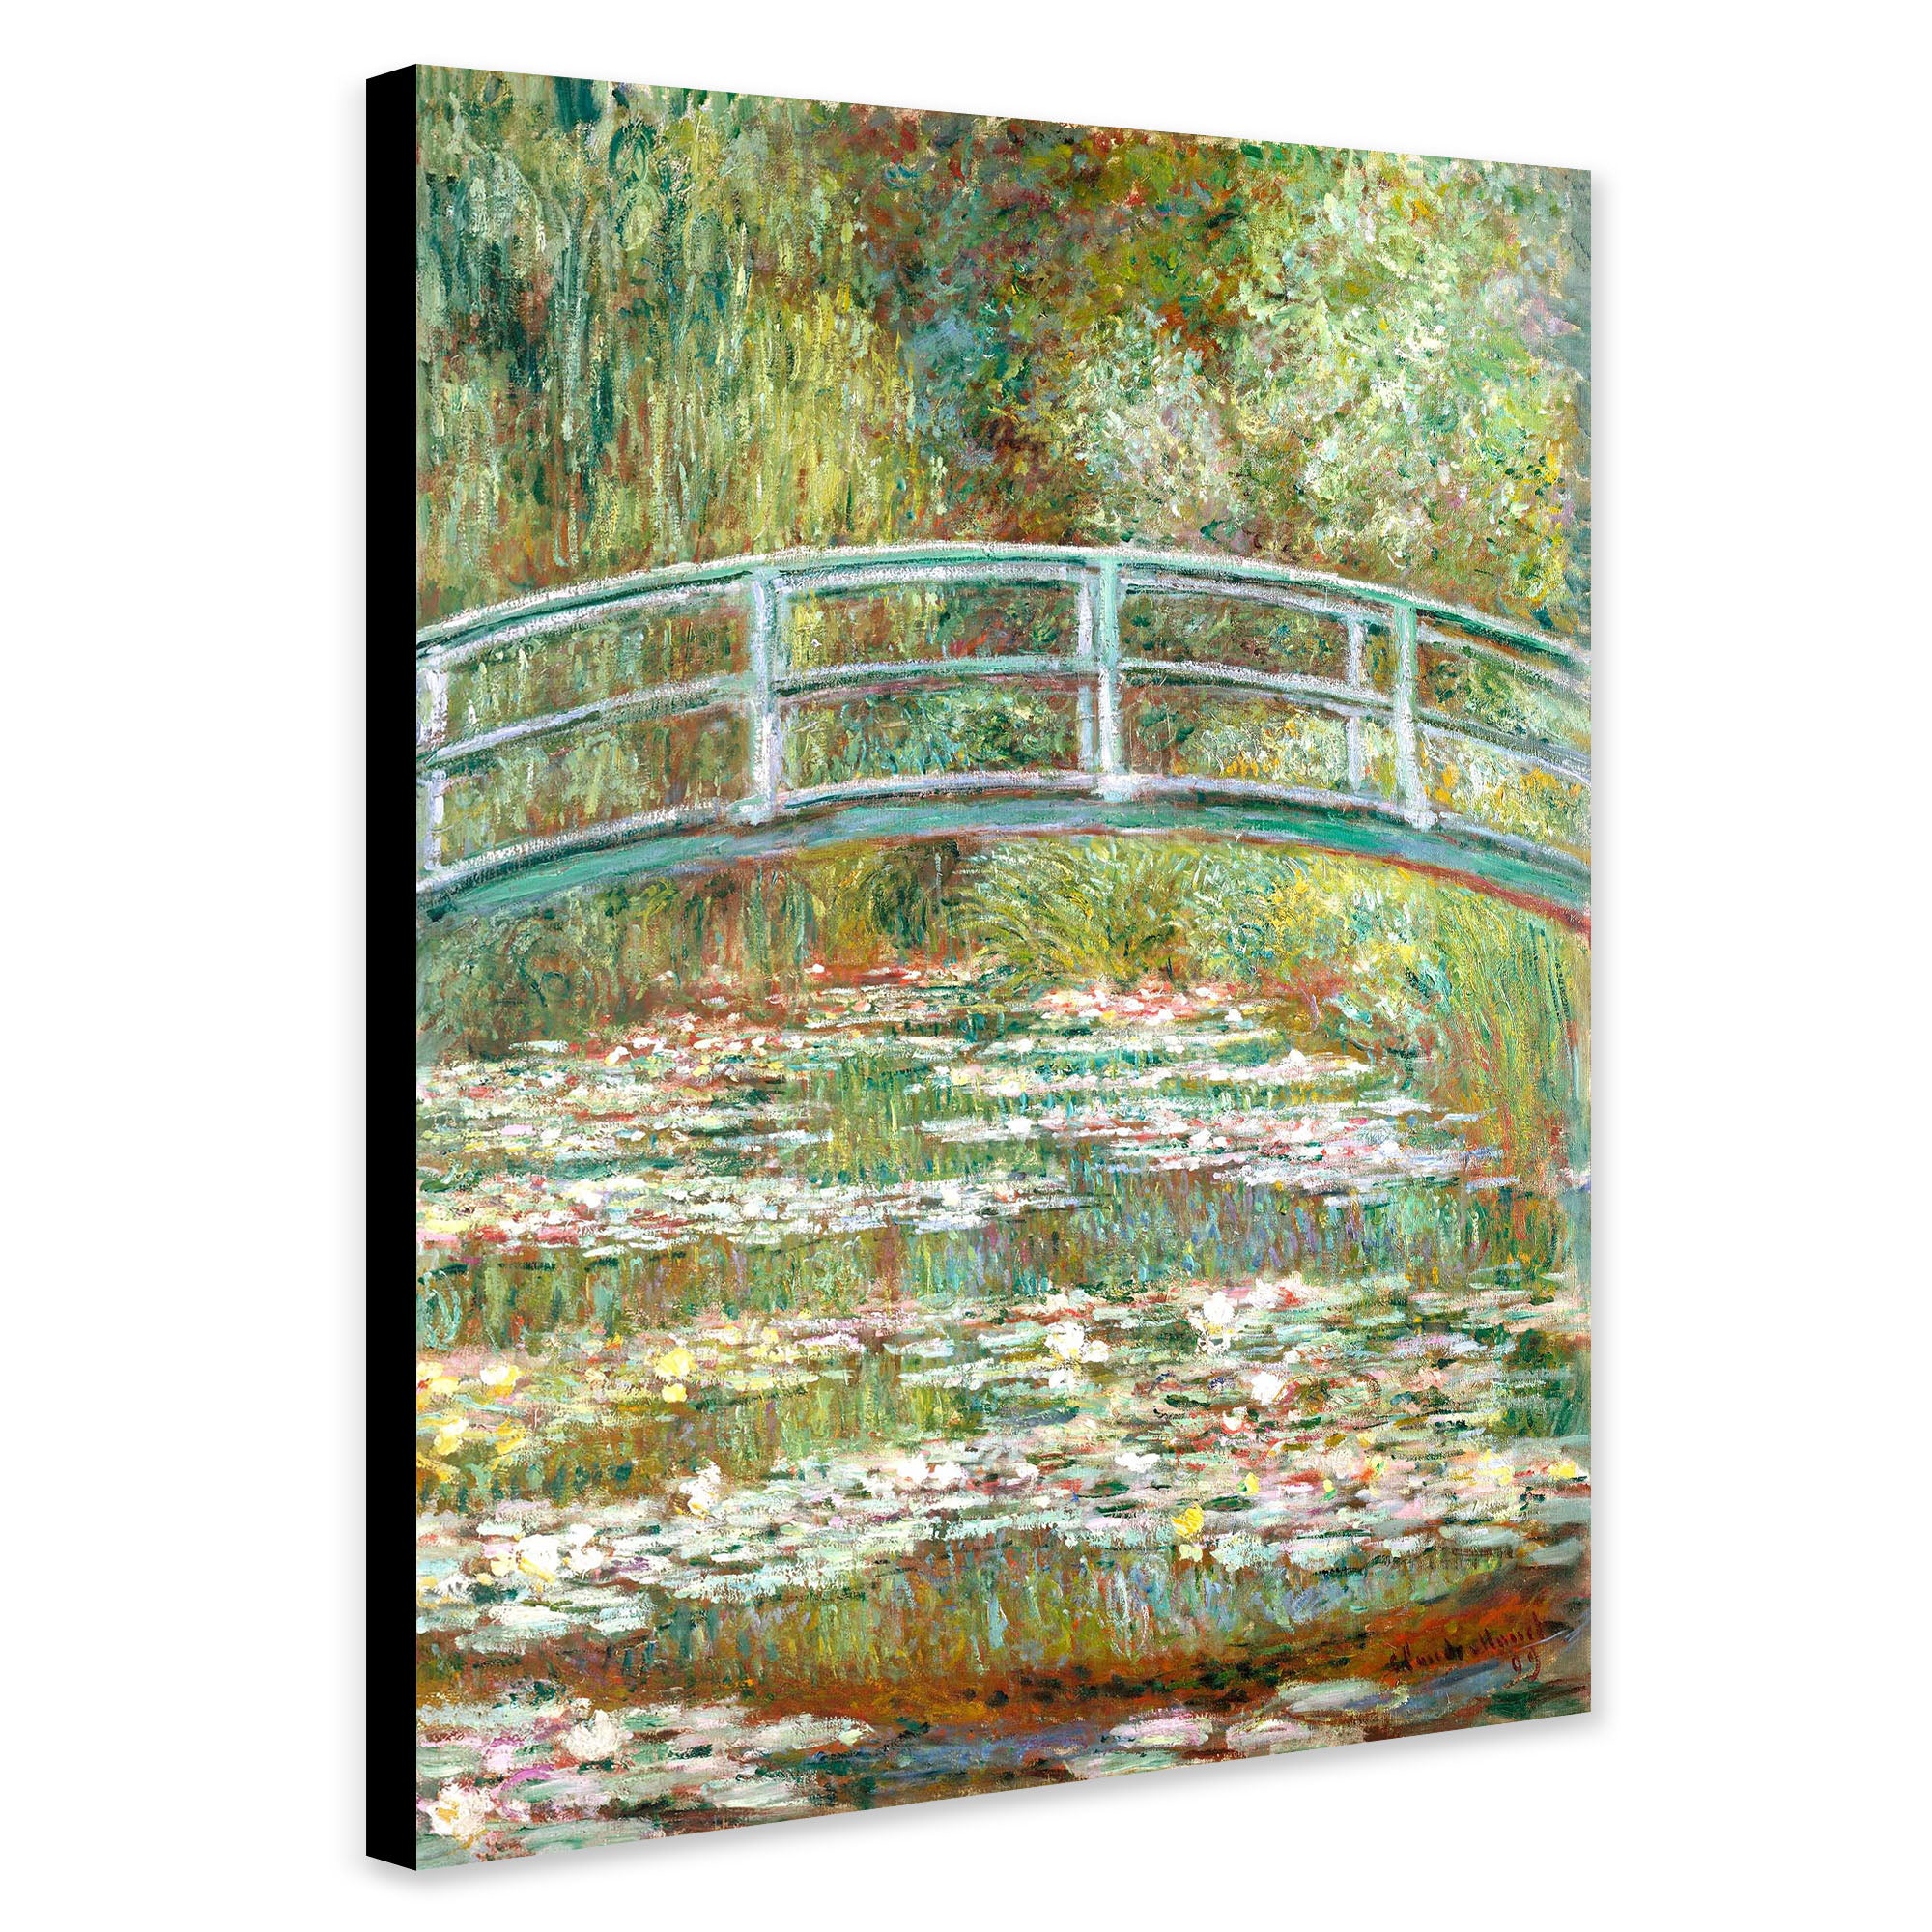 Bridge Over A Pond Of Water Lilies by Claude Monet - Canvas Wall Art Framed Print - Various Sizes